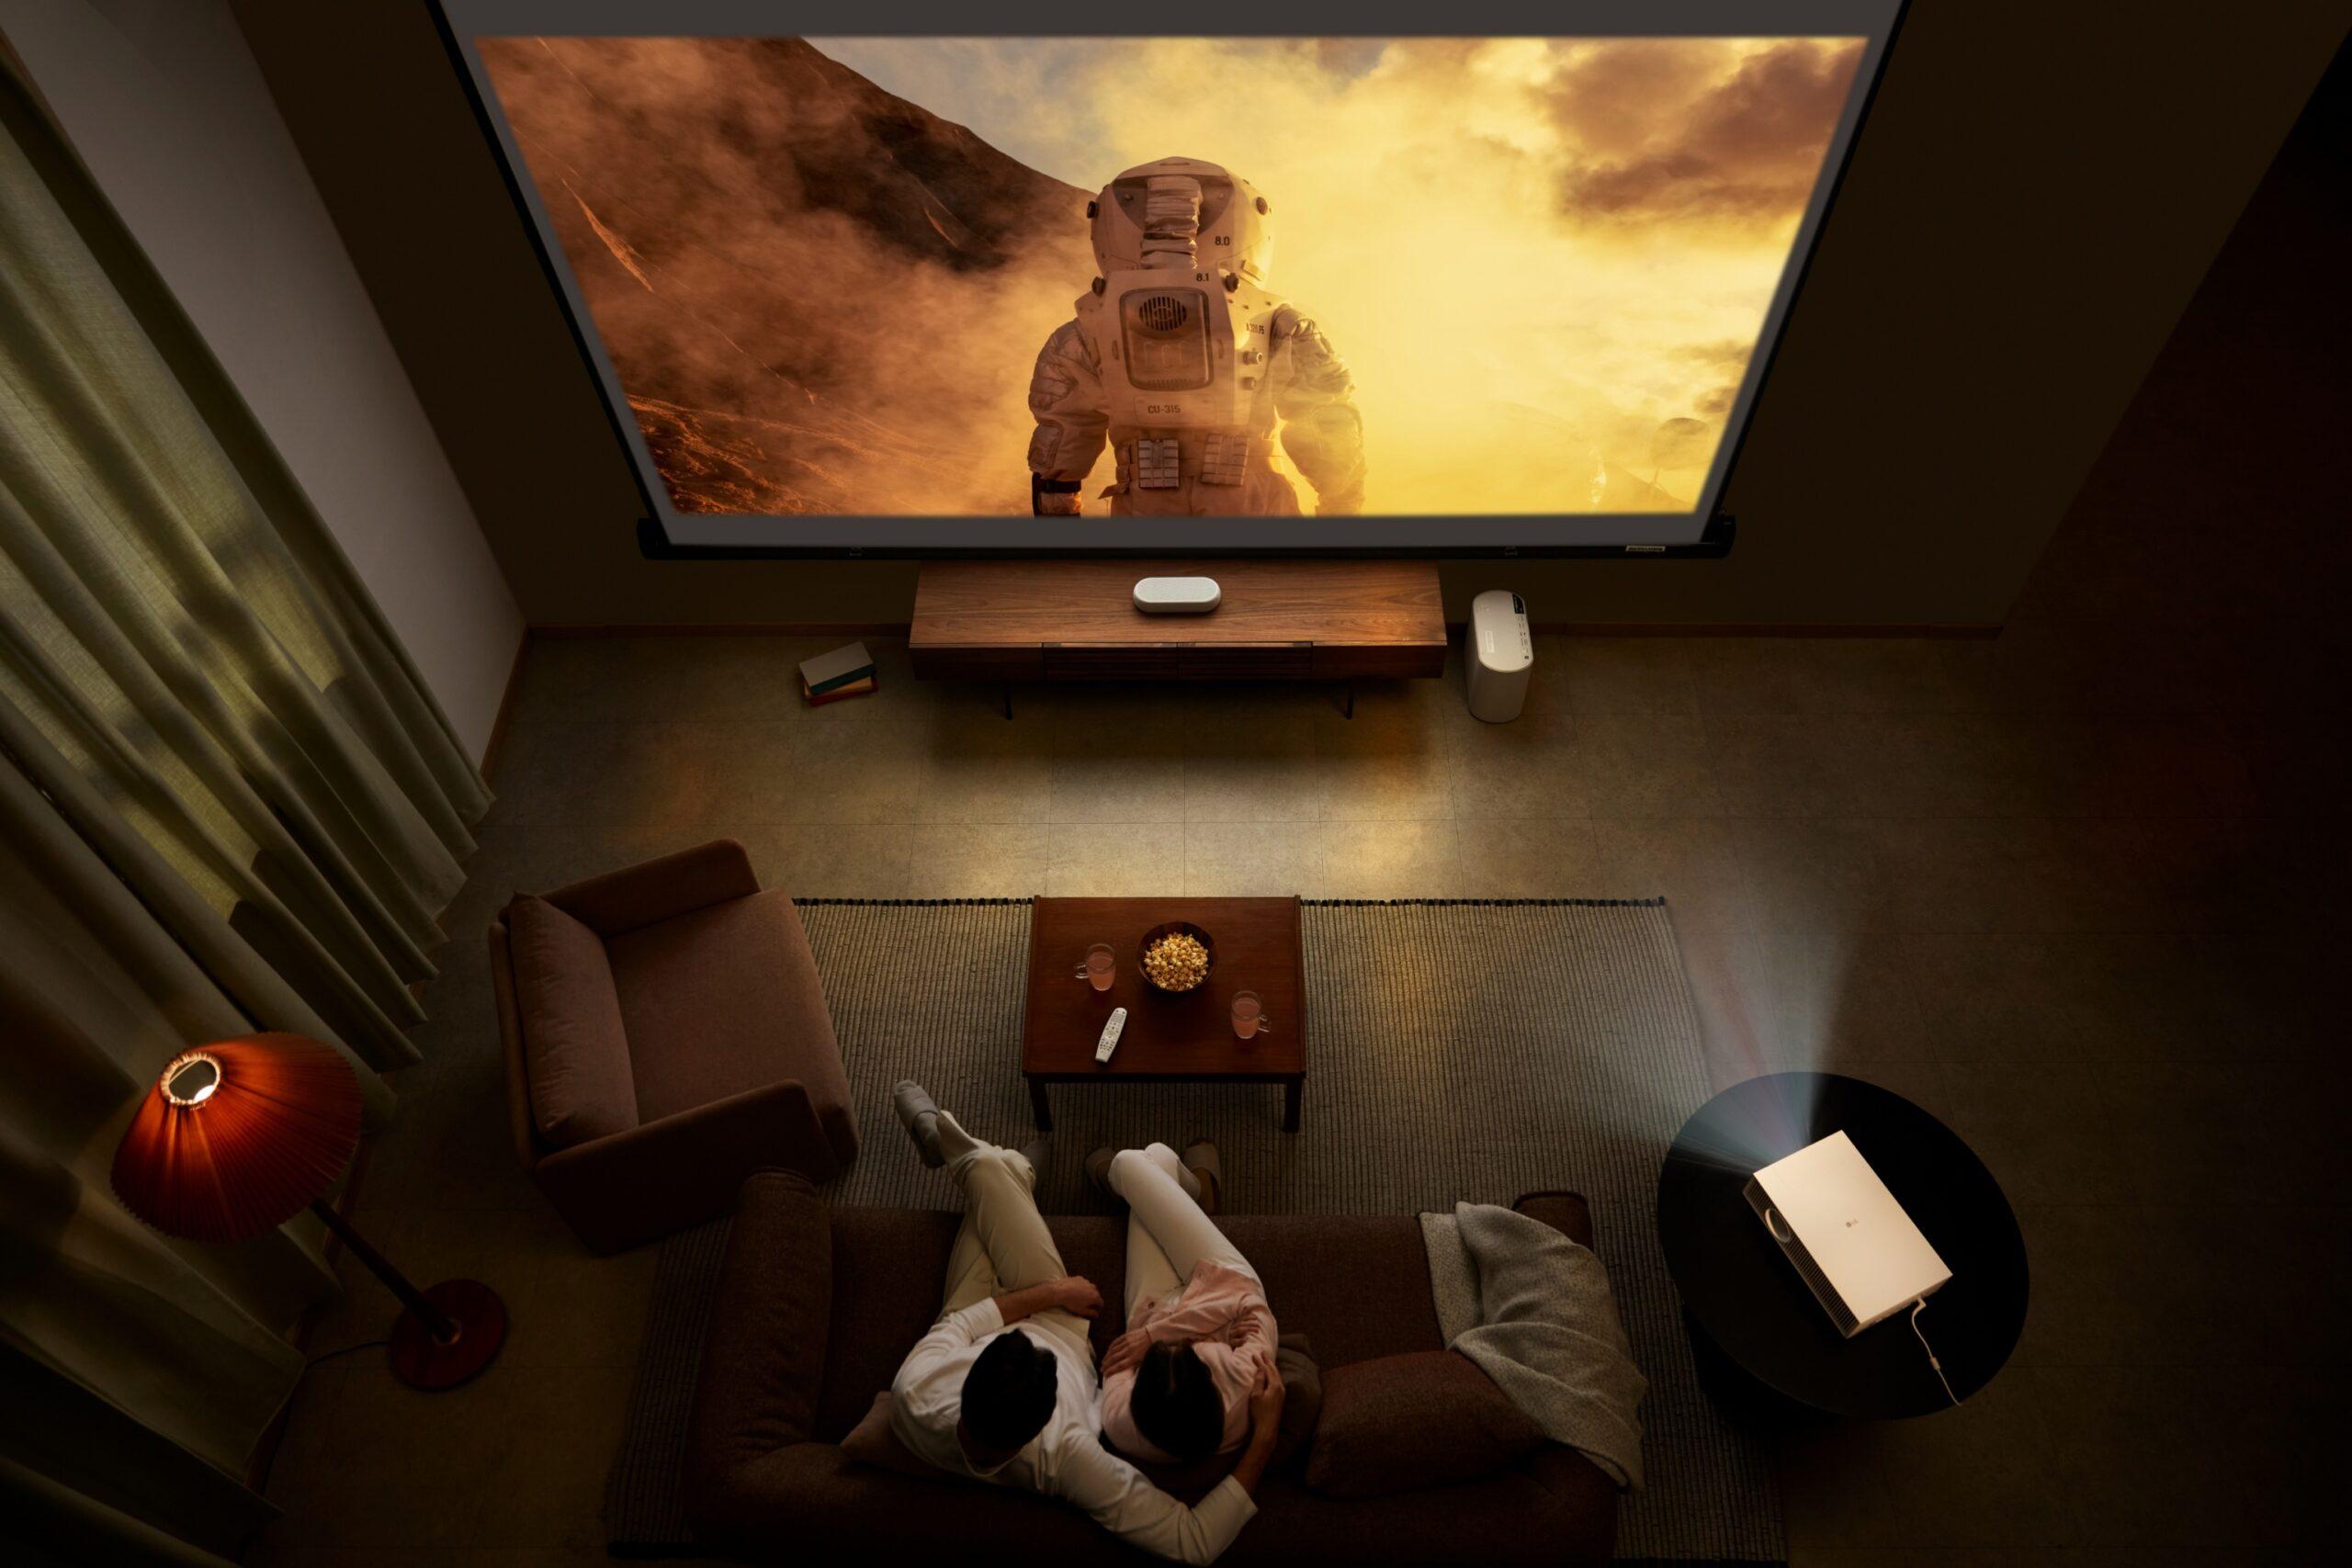 Bring the cinematic experience to your living room e4ca5ea1 lg cinebeam lifestyle 03 scaled